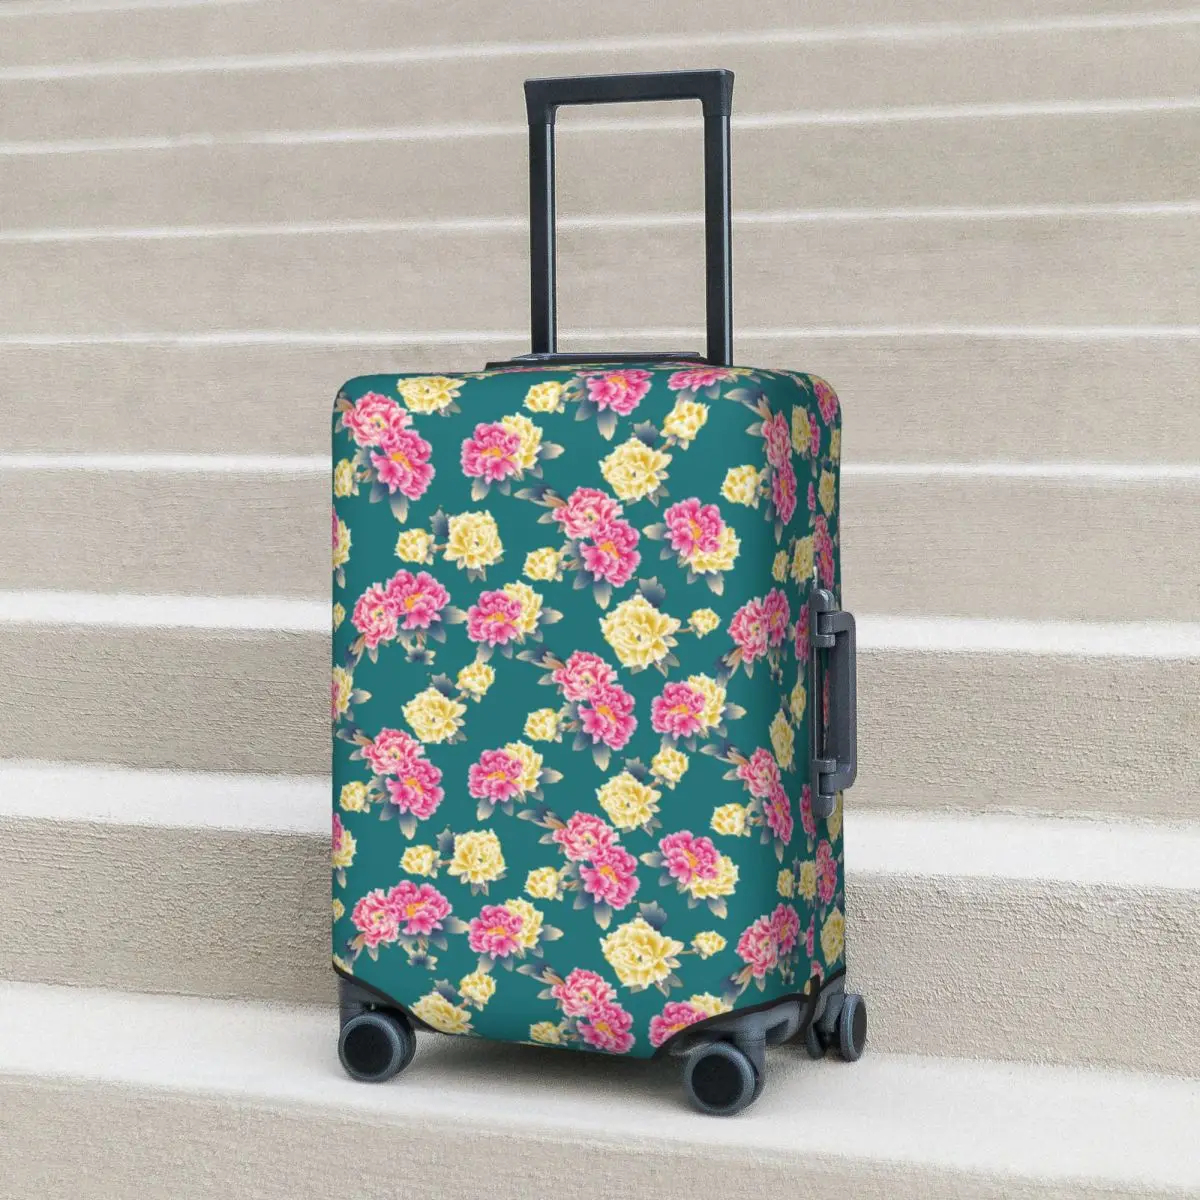 

Luxury Flowers Suitcase Cover DongBei Cruise Trip Vacation Strectch Luggage Case Protector